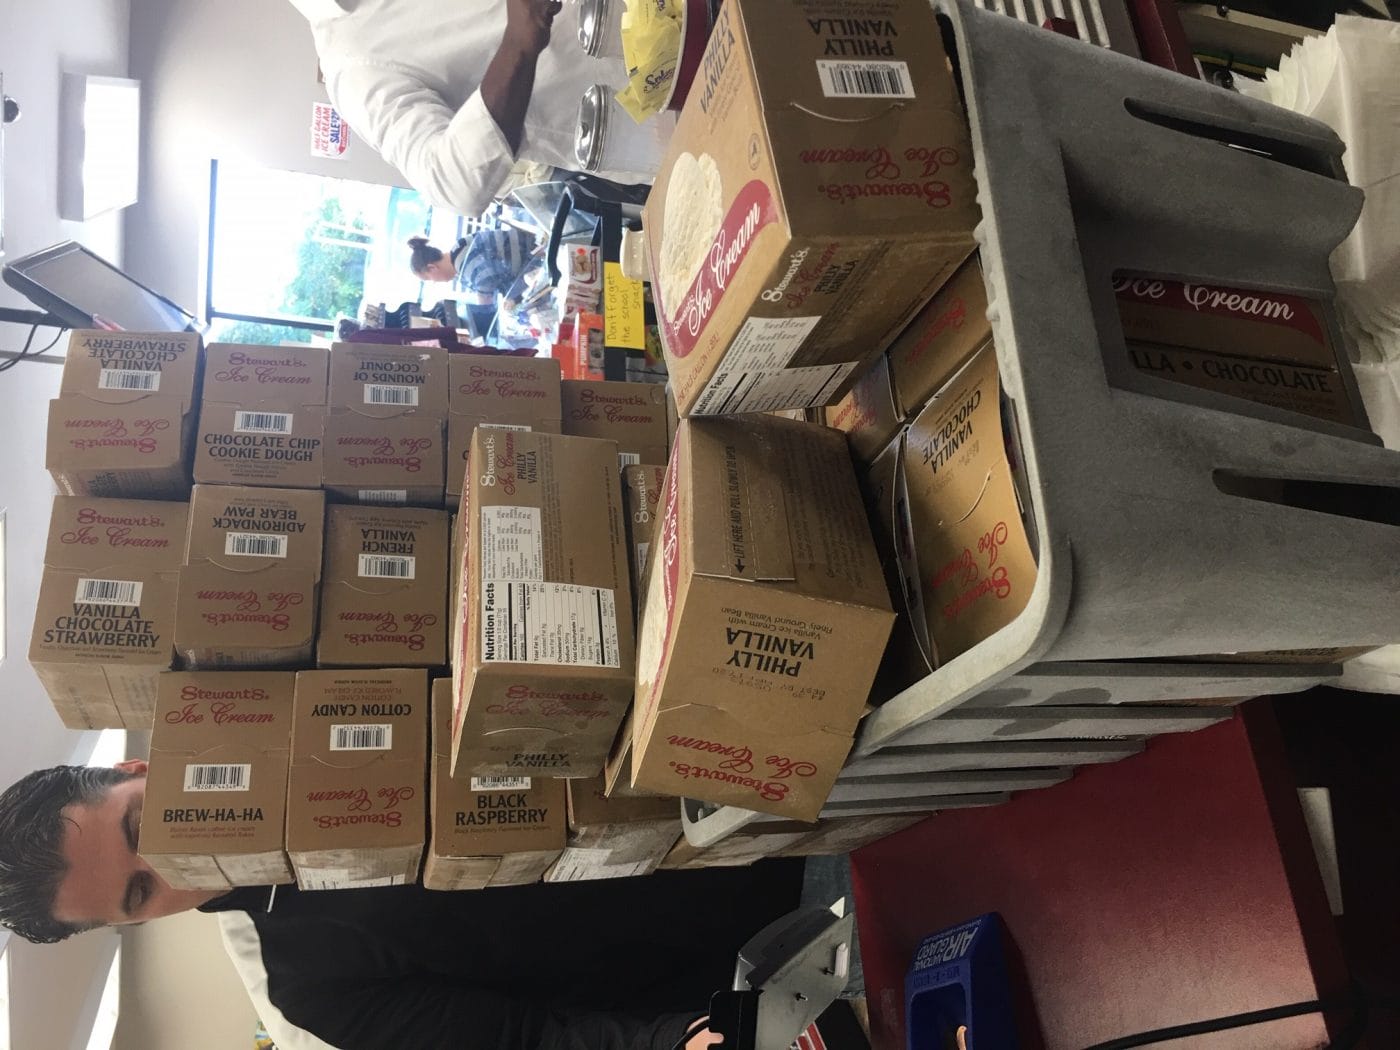 Troy city Police donated 36 1/2 gallons of ice cream